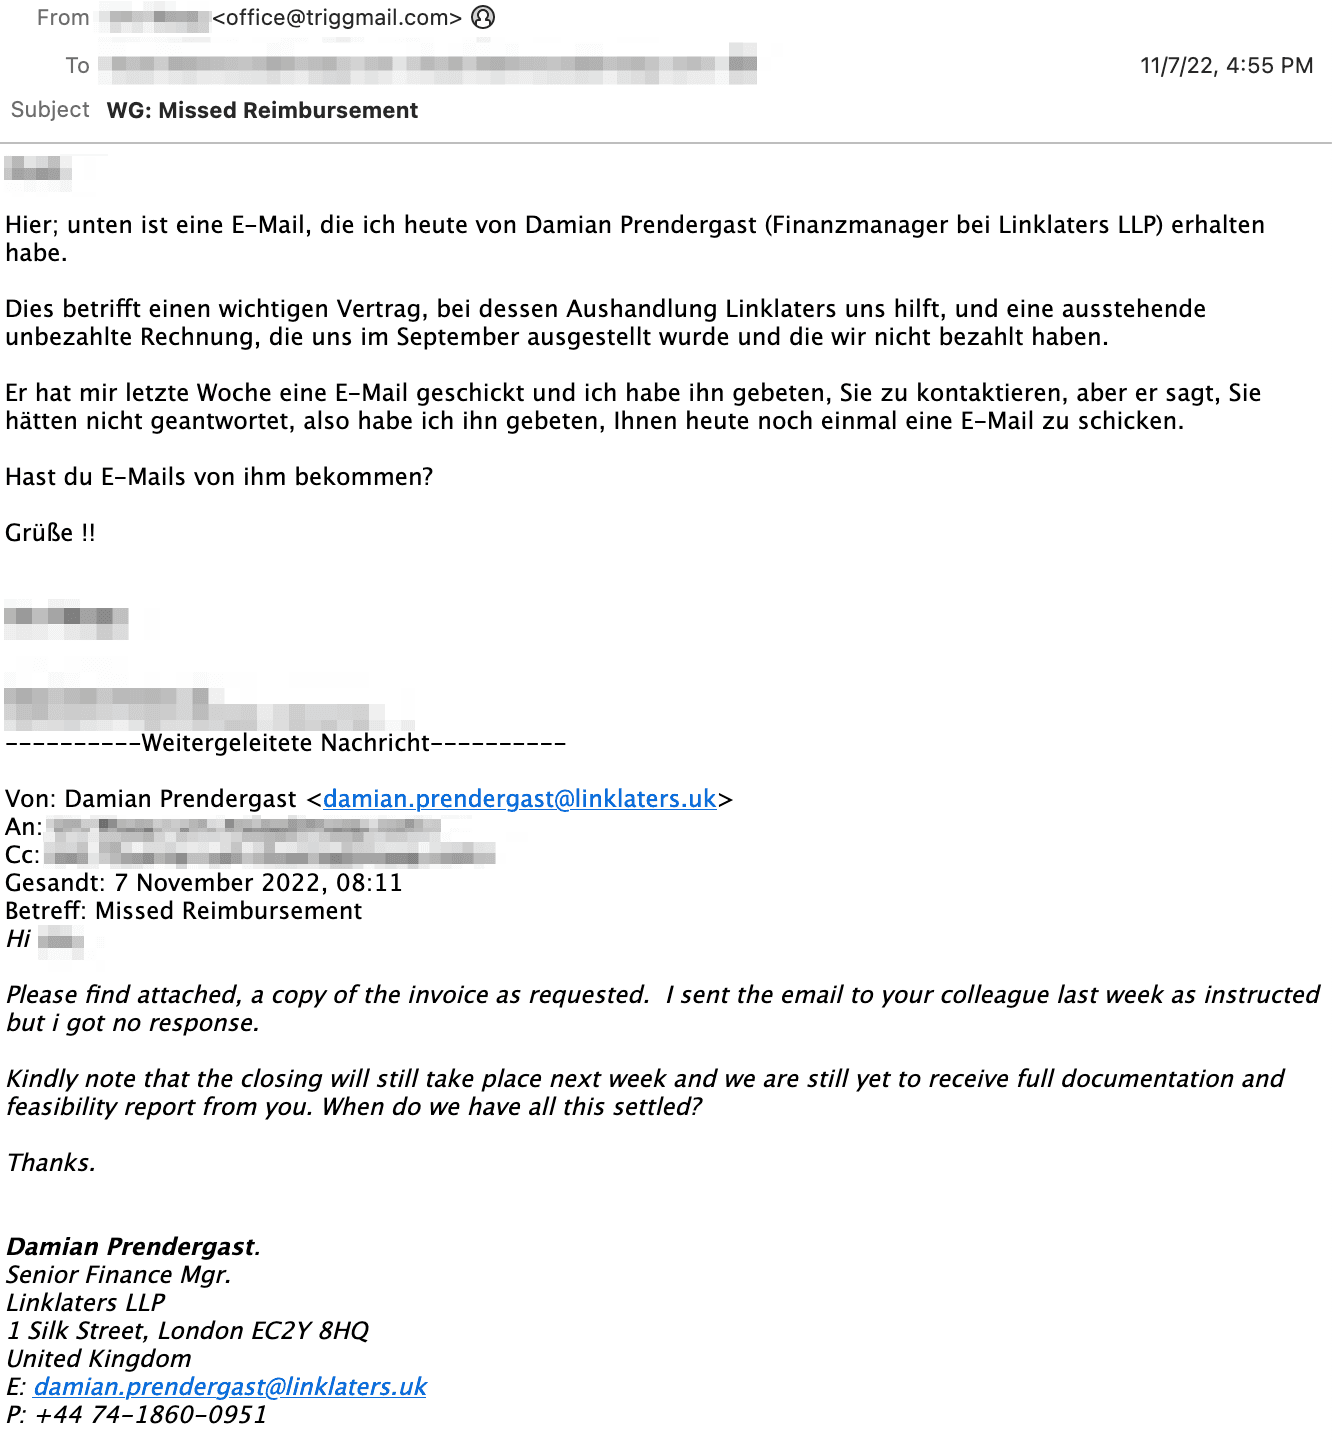 Fake Email Chain BEC Attack